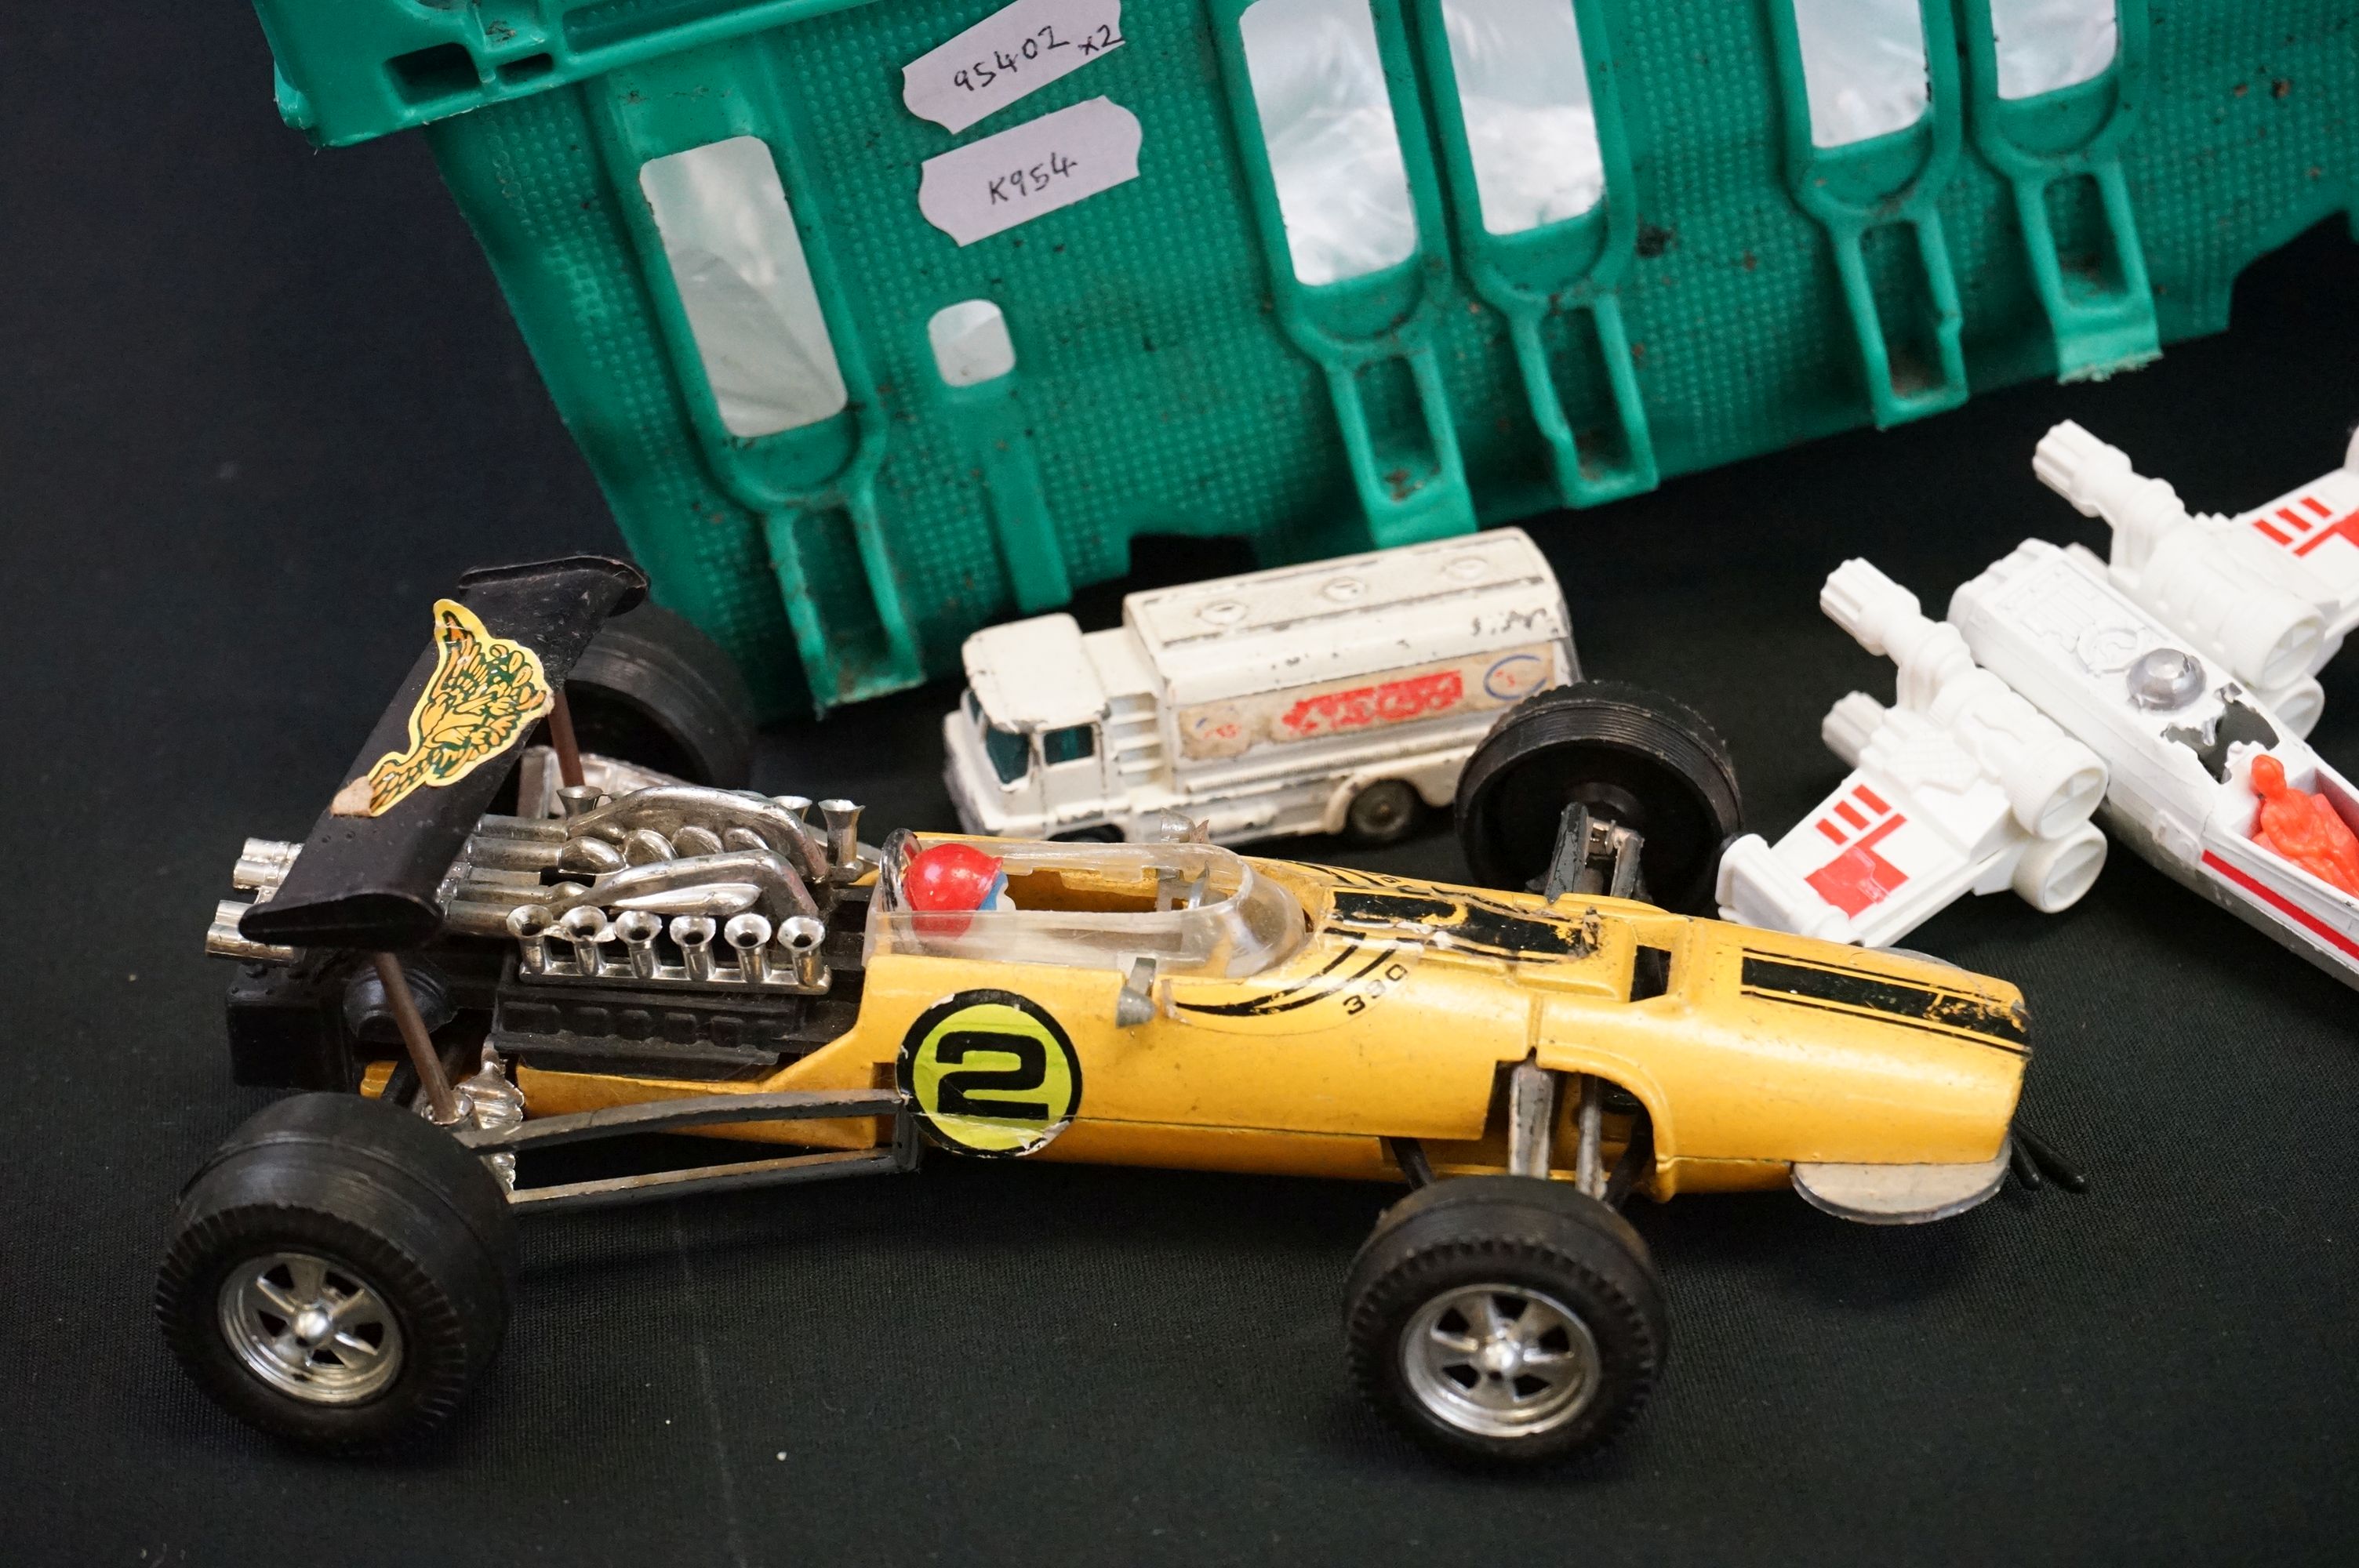 Over 35 Mid 20th C onwards play worn diecast models to include Dinky, Corgi, Matchbox and Lone Star, - Image 9 of 15